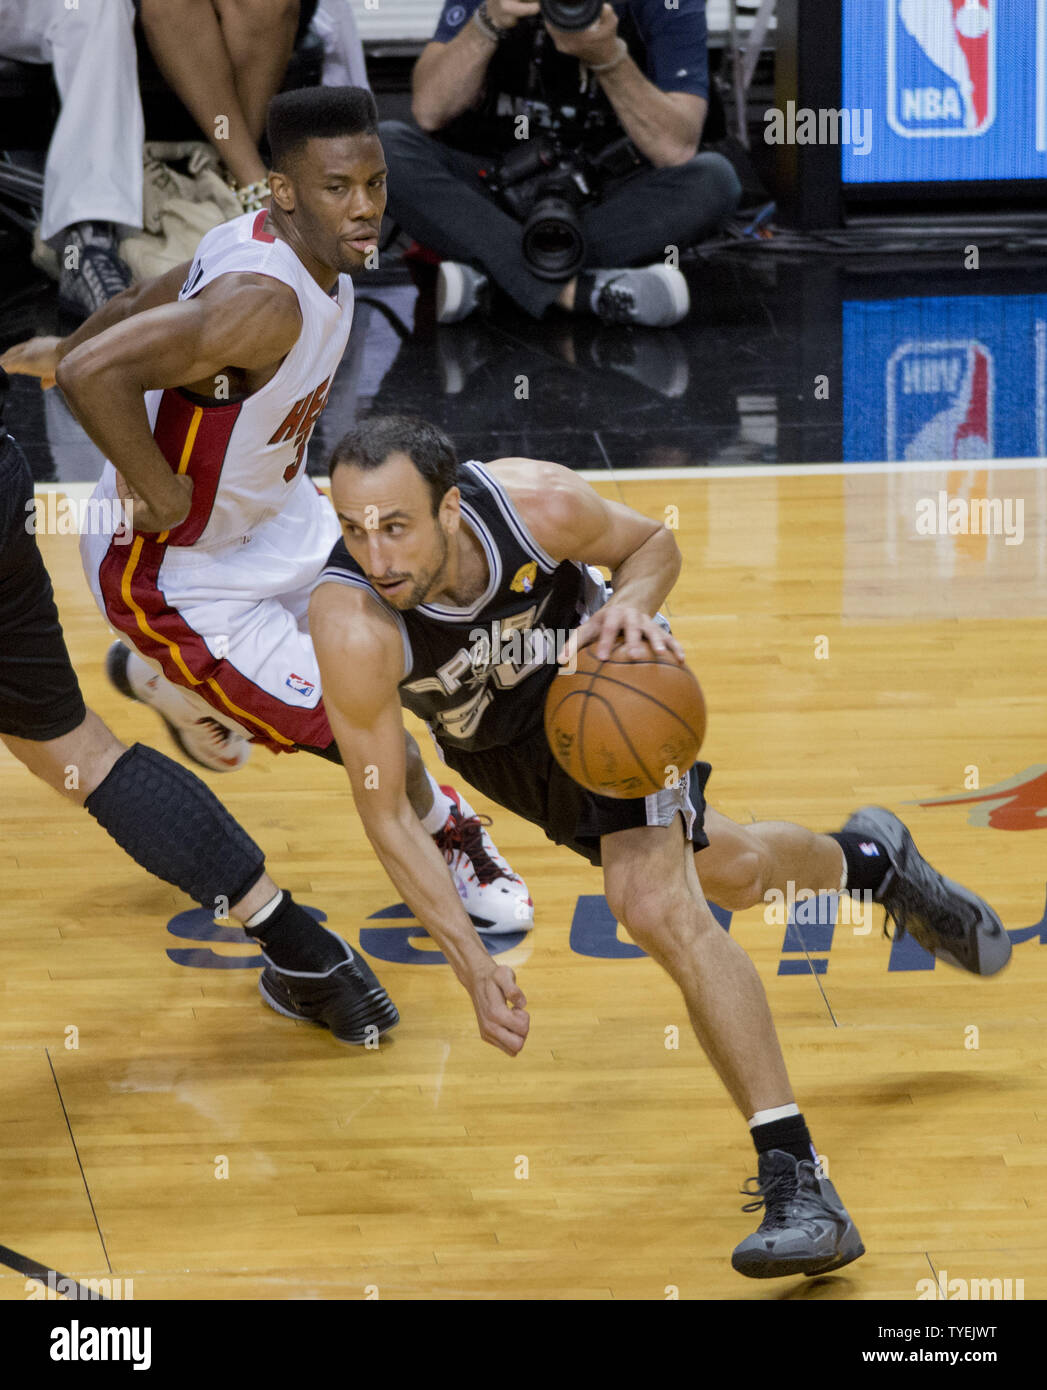 San Antonio Spurs Manu Ginobili (20) drives past  Miami Heat Norris Cole (30)  in game 4 of the NBA Finals at the American Airlines Arena, in Miami, June 12, 2014. The Spurs defeated the Heat 107-86 to take a 3-1 game lead in the best of seven games. UPI/Gary I Rothstein Stock Photo